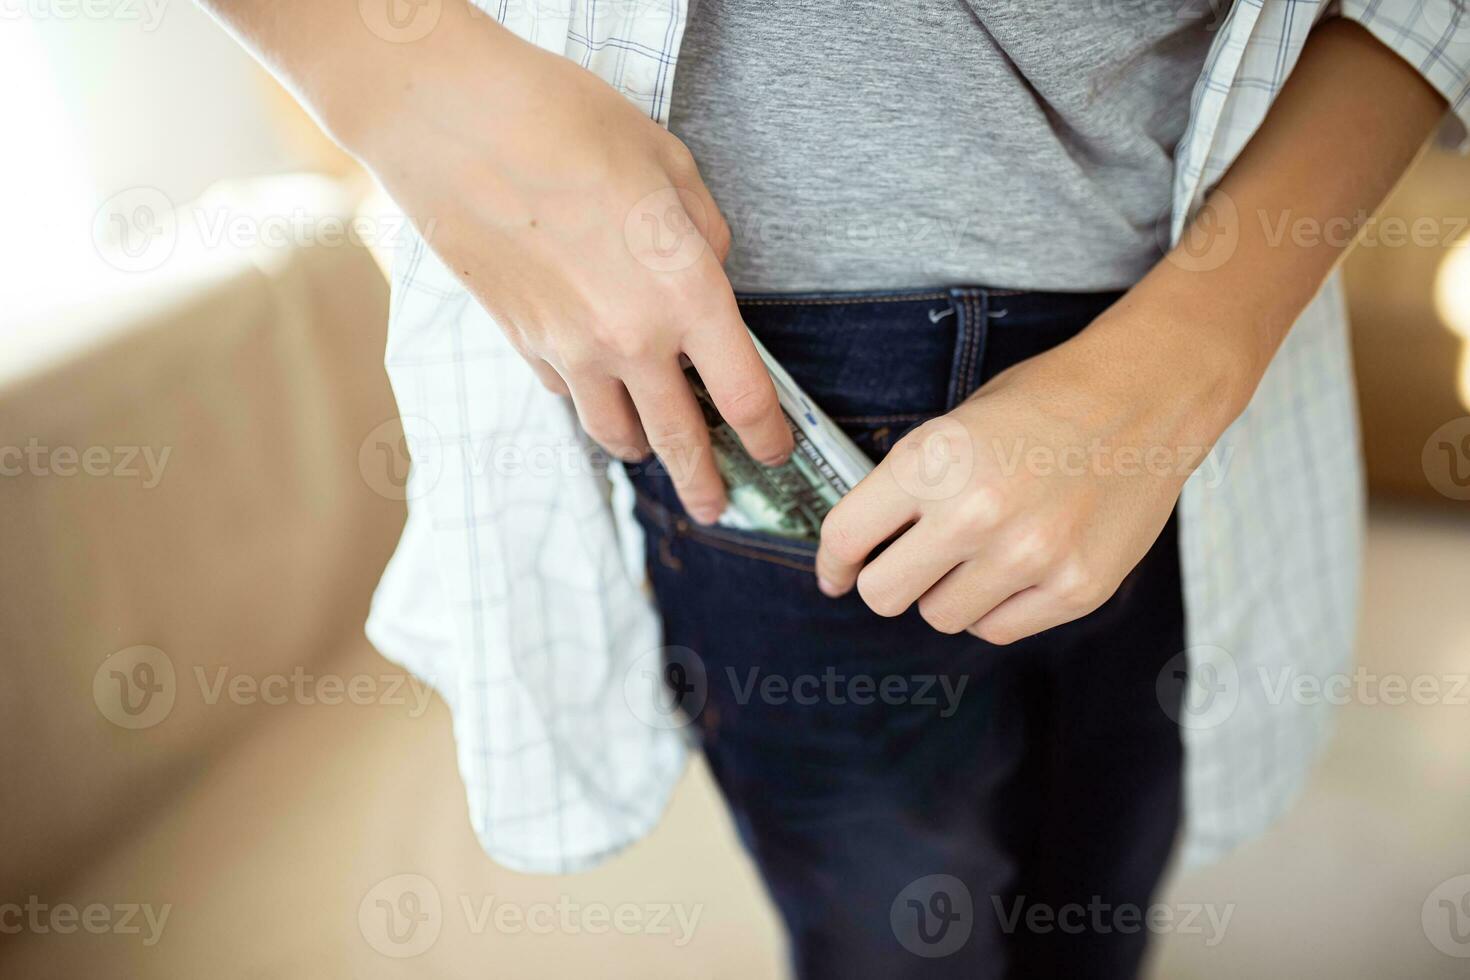 A teenager puts a stack of hundred-dollar bills in the pocket of jeans. A boy in a shirt hides cash currency in his pants pocket photo